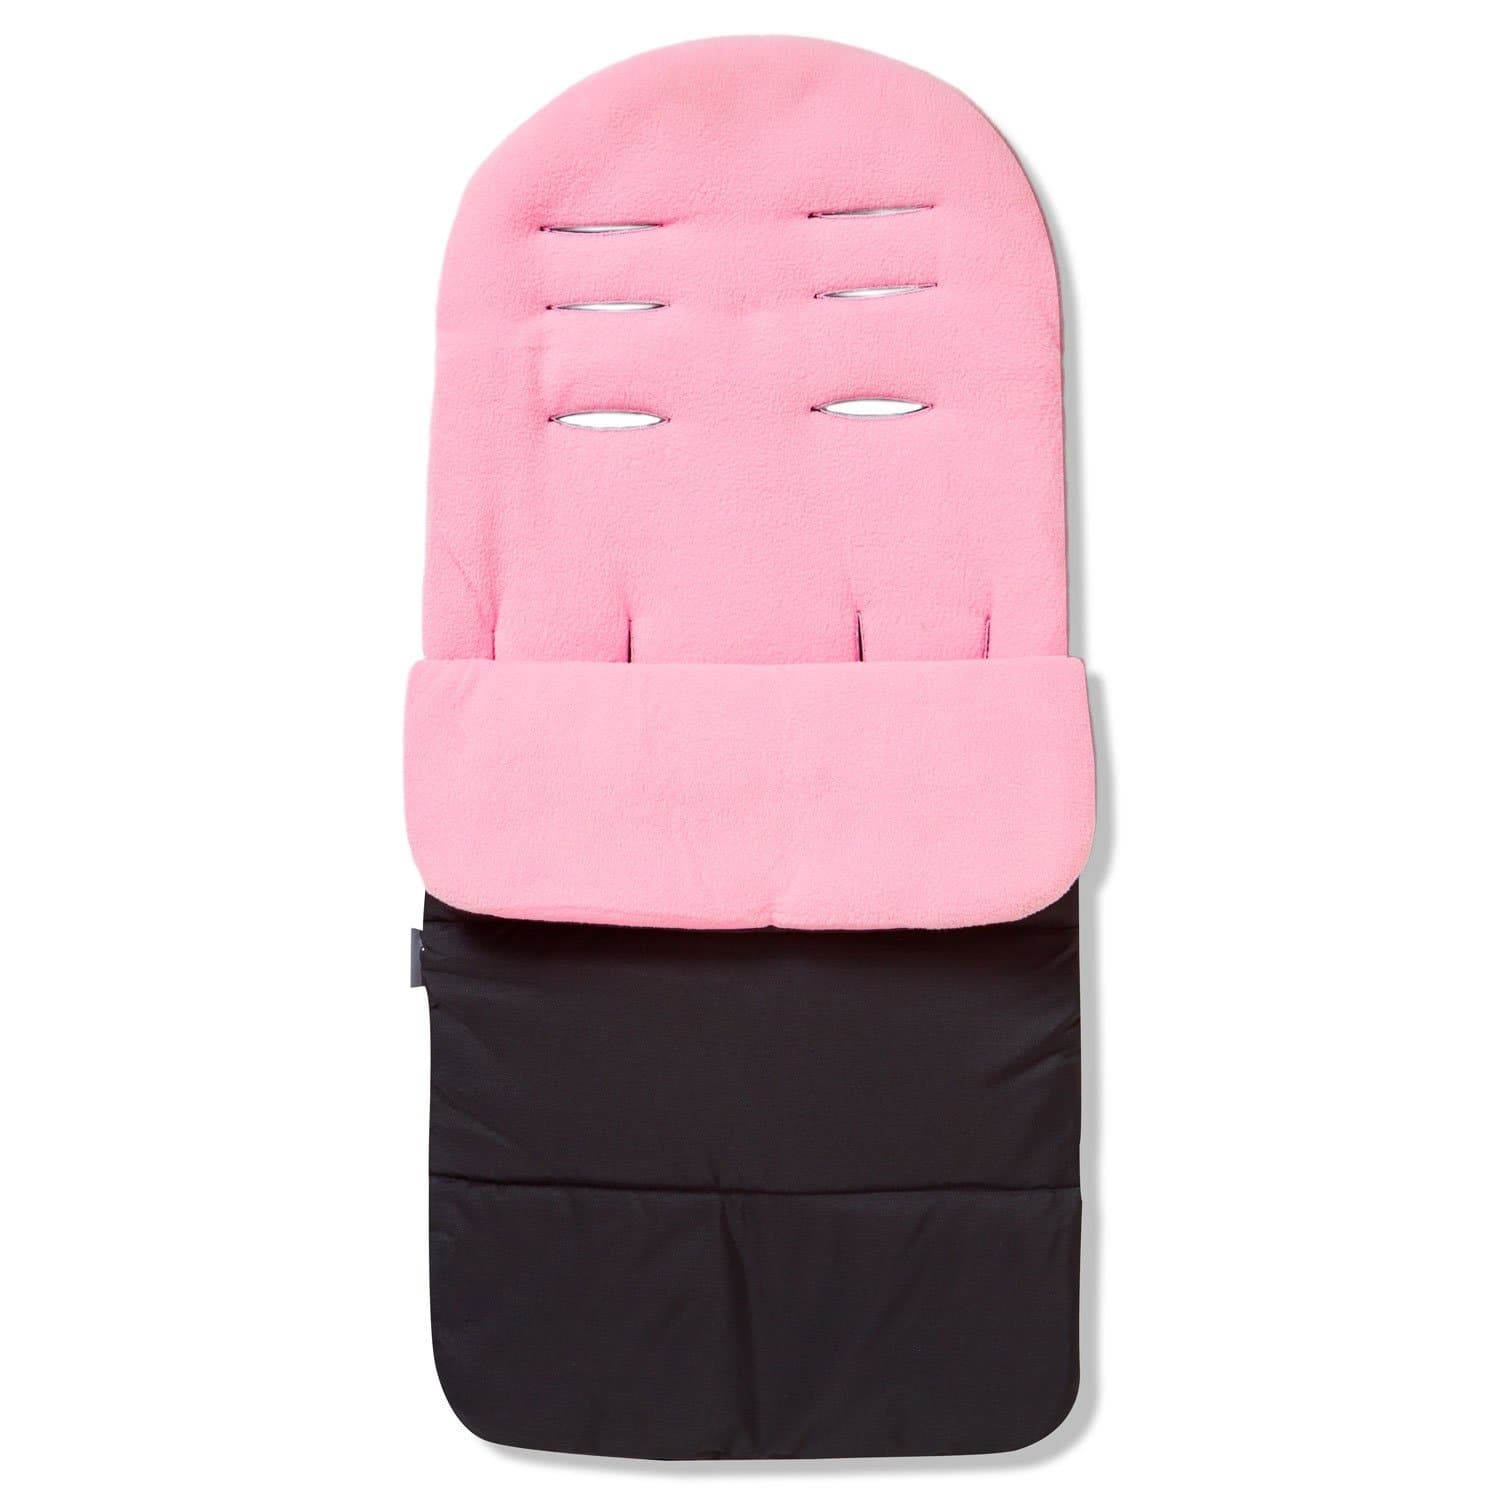 Premium Footmuff / Cosy Toes Compatible with Unilove - Candy Pink / Fits All Models | For Your Little One